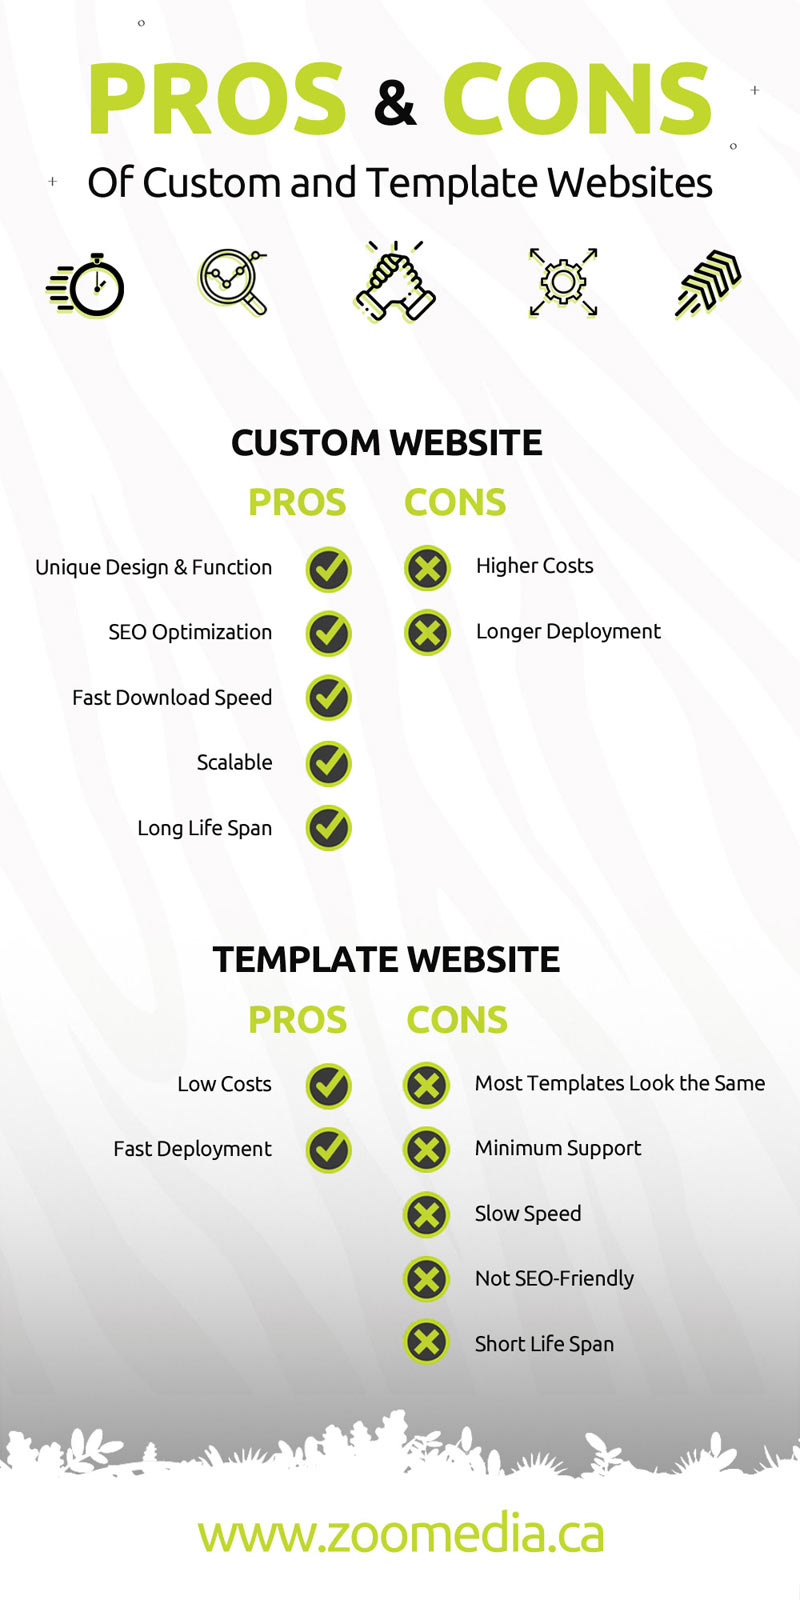 Custom Design or Template Website: Which is right for you?